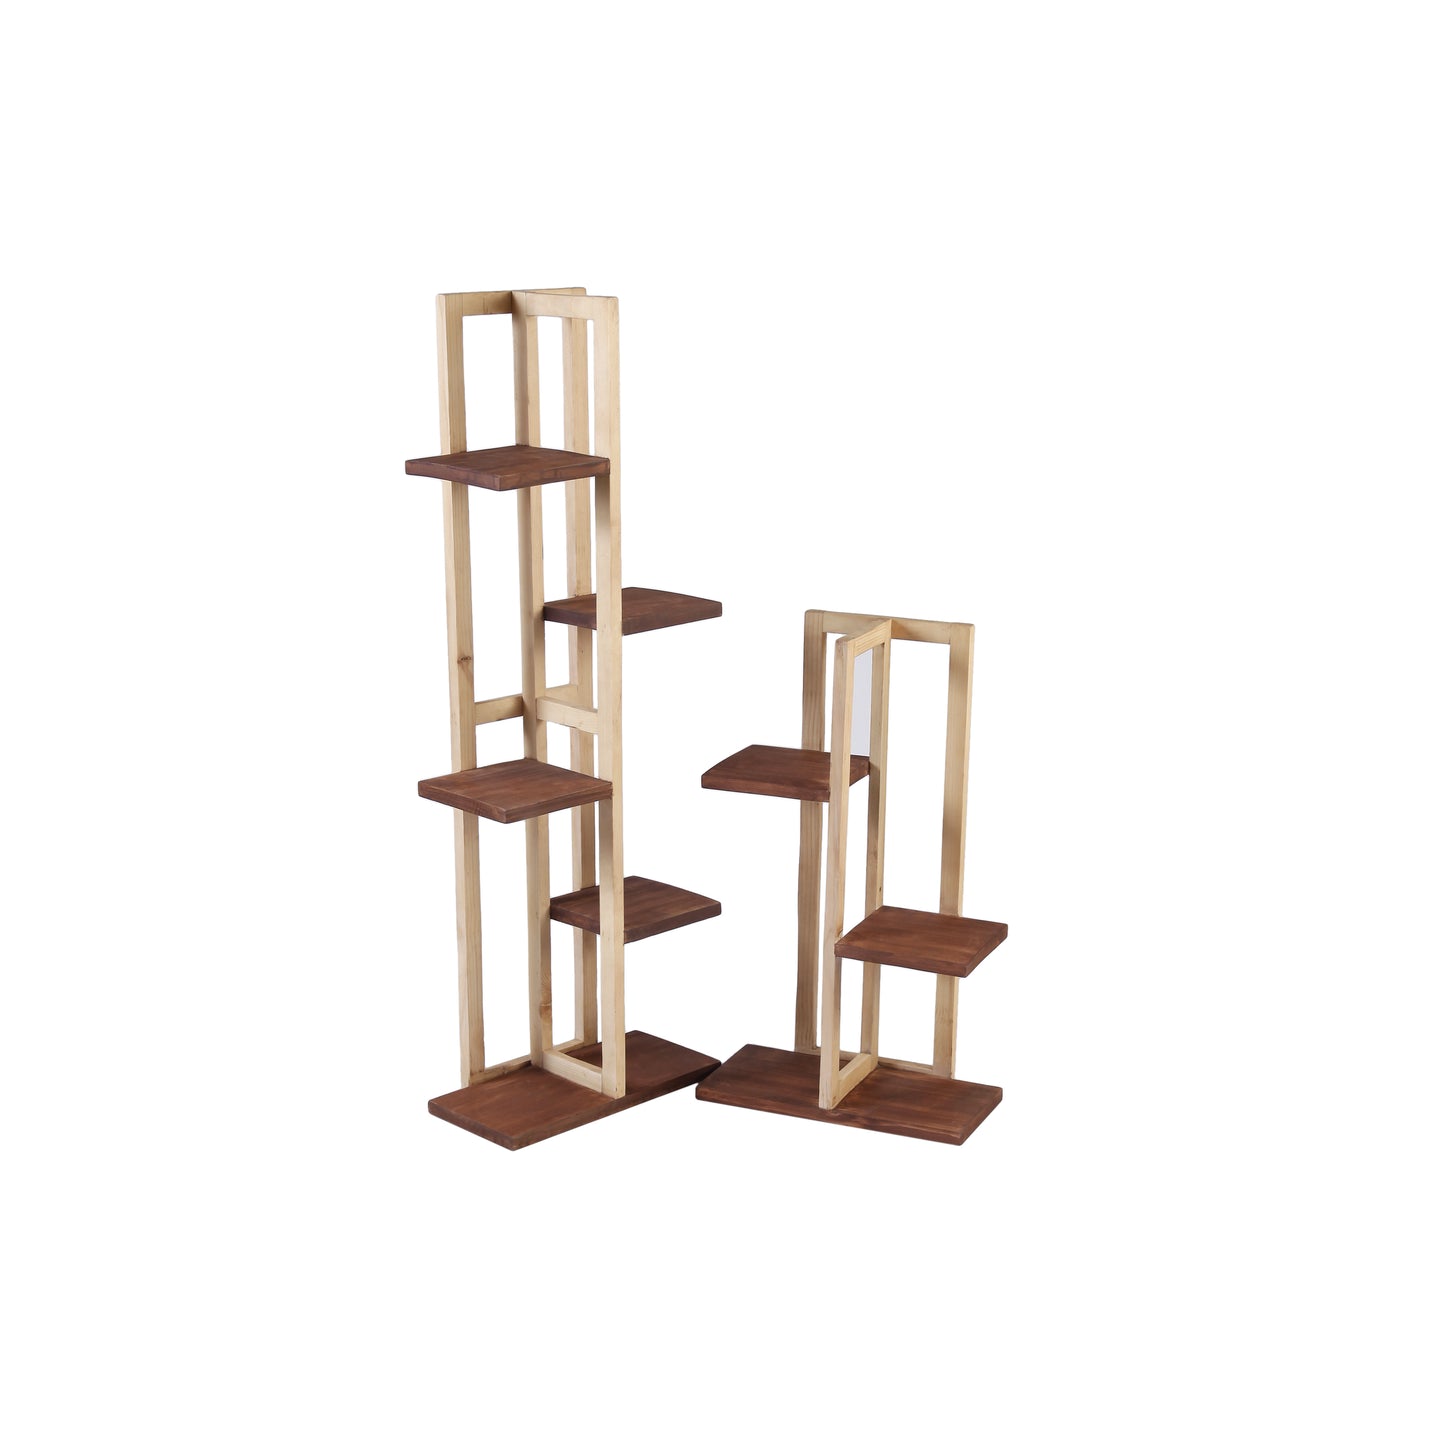 A Tiny Mistake All Purpose Three Tier Stand (One Piece) (For Planters, Ornaments and Accessories) (Natural Pine Wood Stand with Dark Planks)